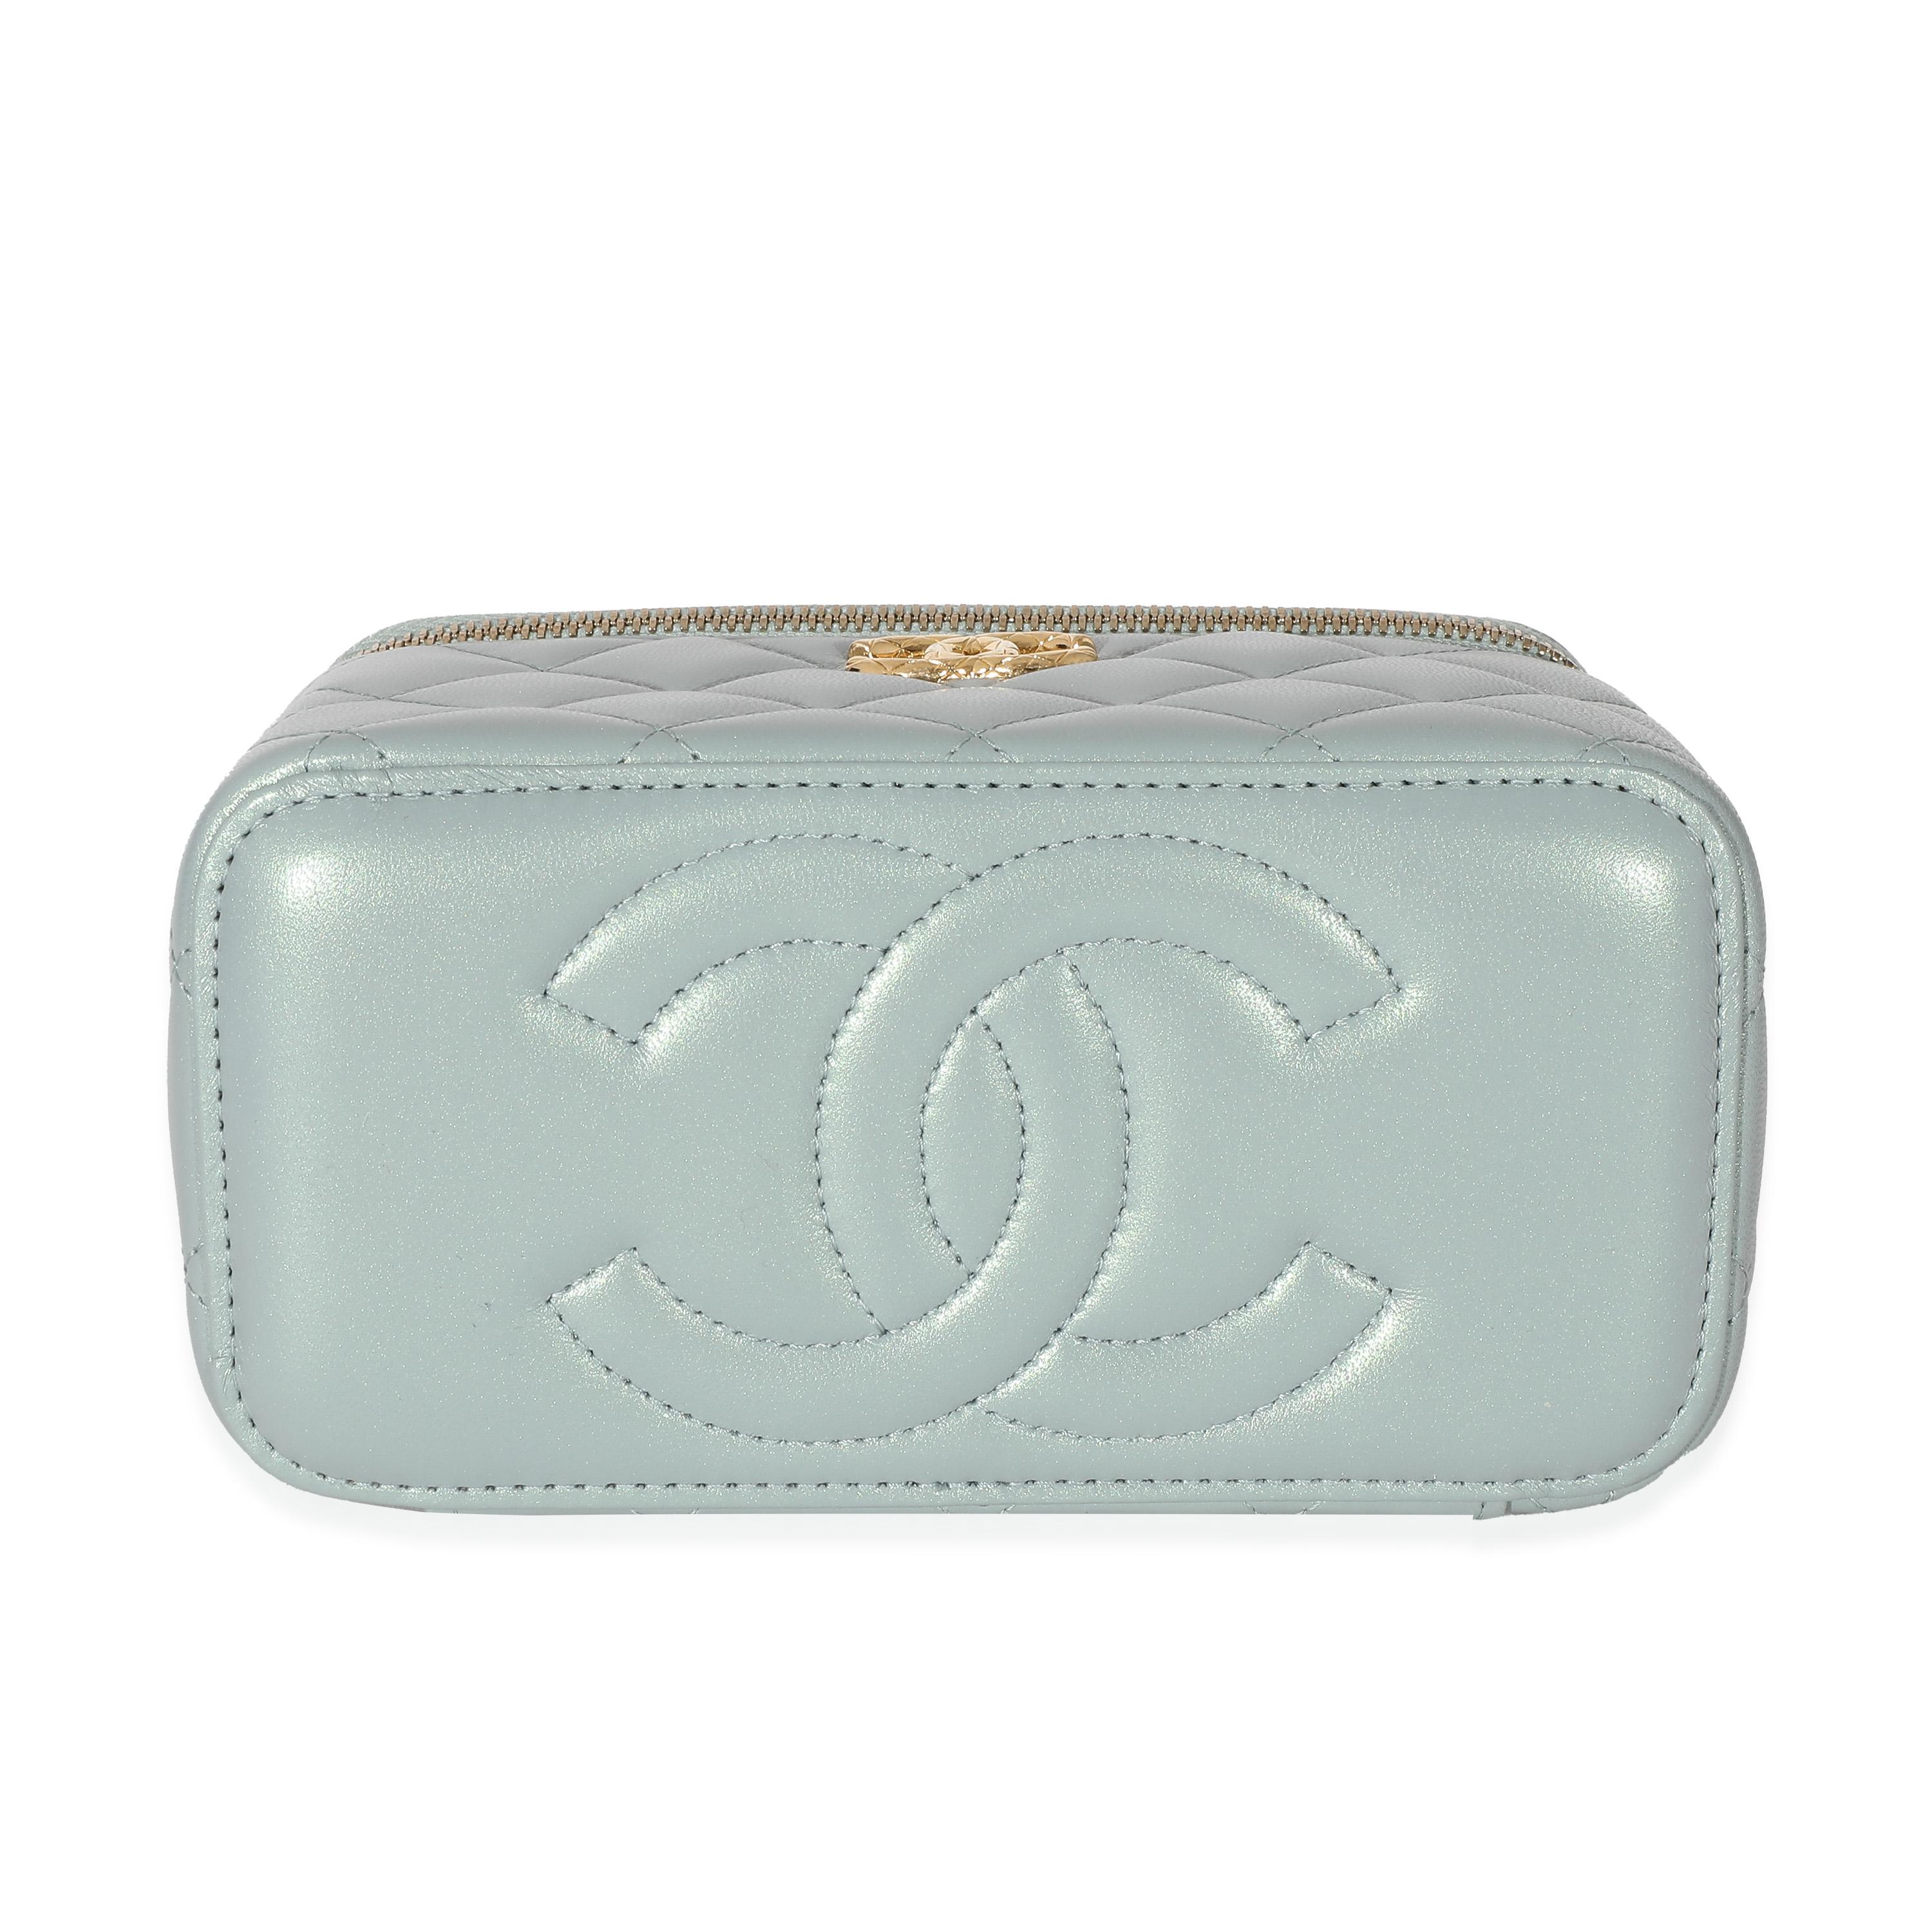 Listing Title: Chanel Metallic Green Lambskin Quilted Small CC Dynasty Vanity Case With Chain
SKU: 134034
Condition: Pre-owned 
Handbag Condition: Excellent
Condition Comments: Item is in excellent condition and displays light signs of wear.